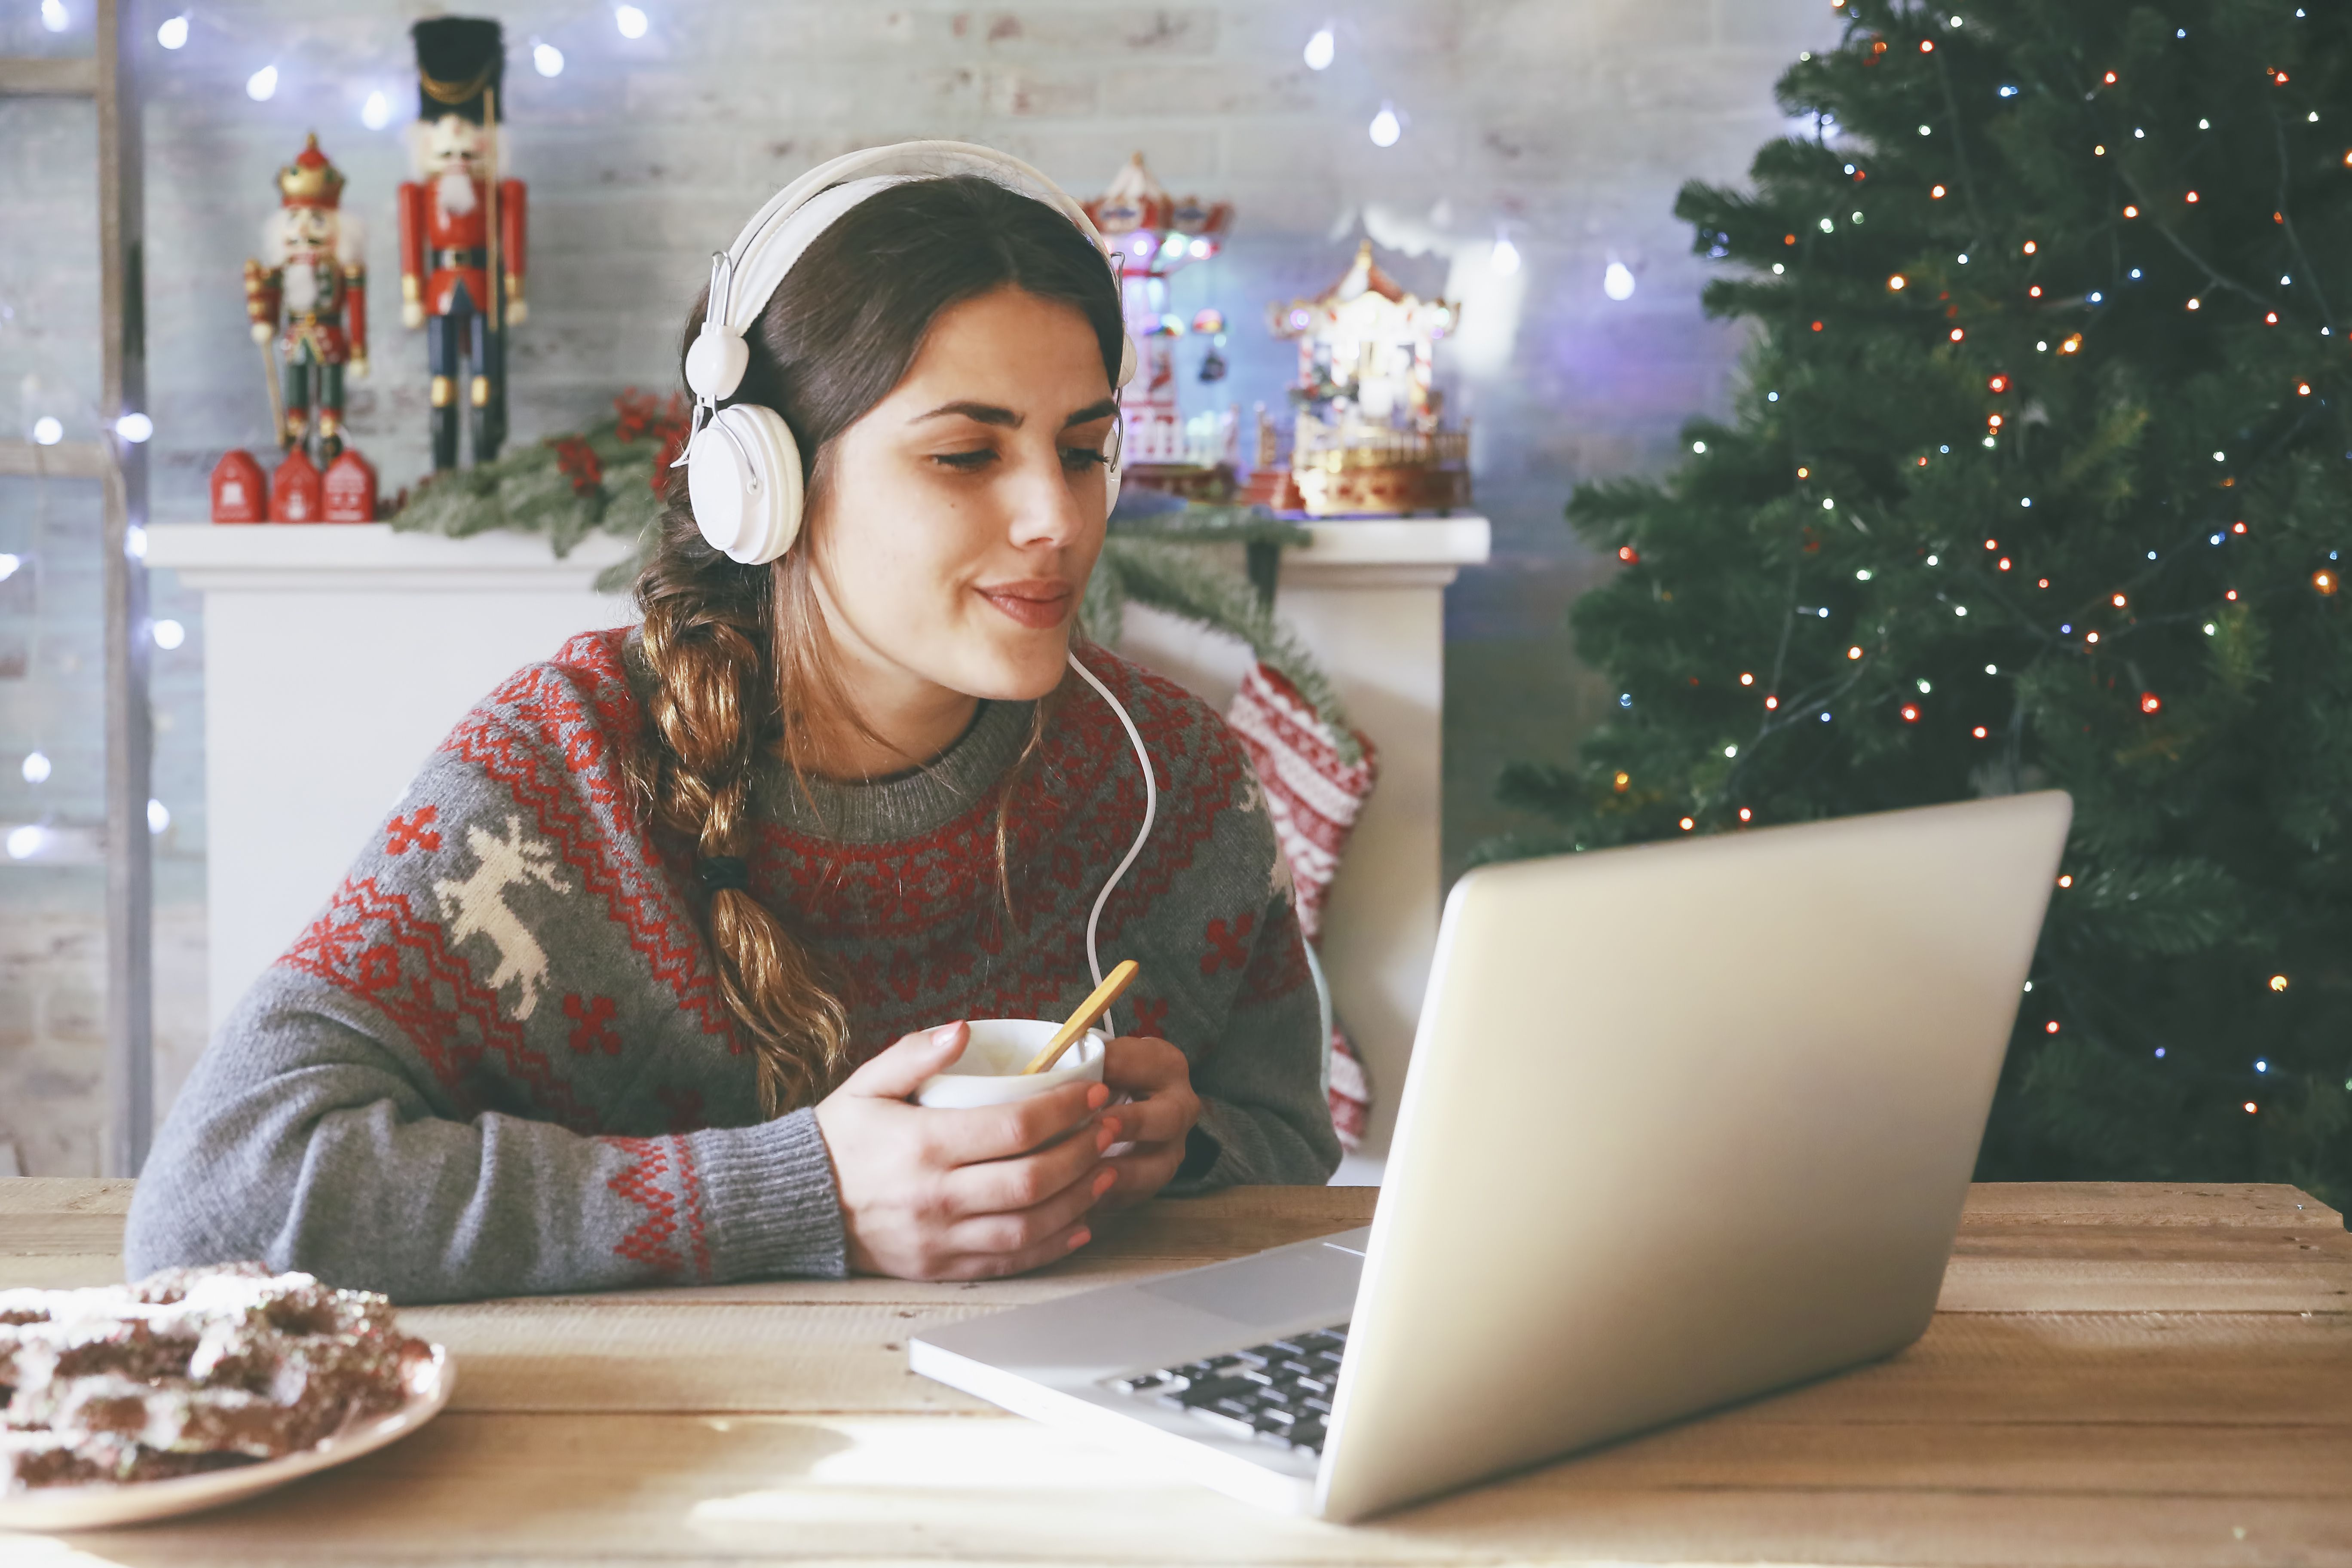 8 Sources for Free Christmas Music Downloads